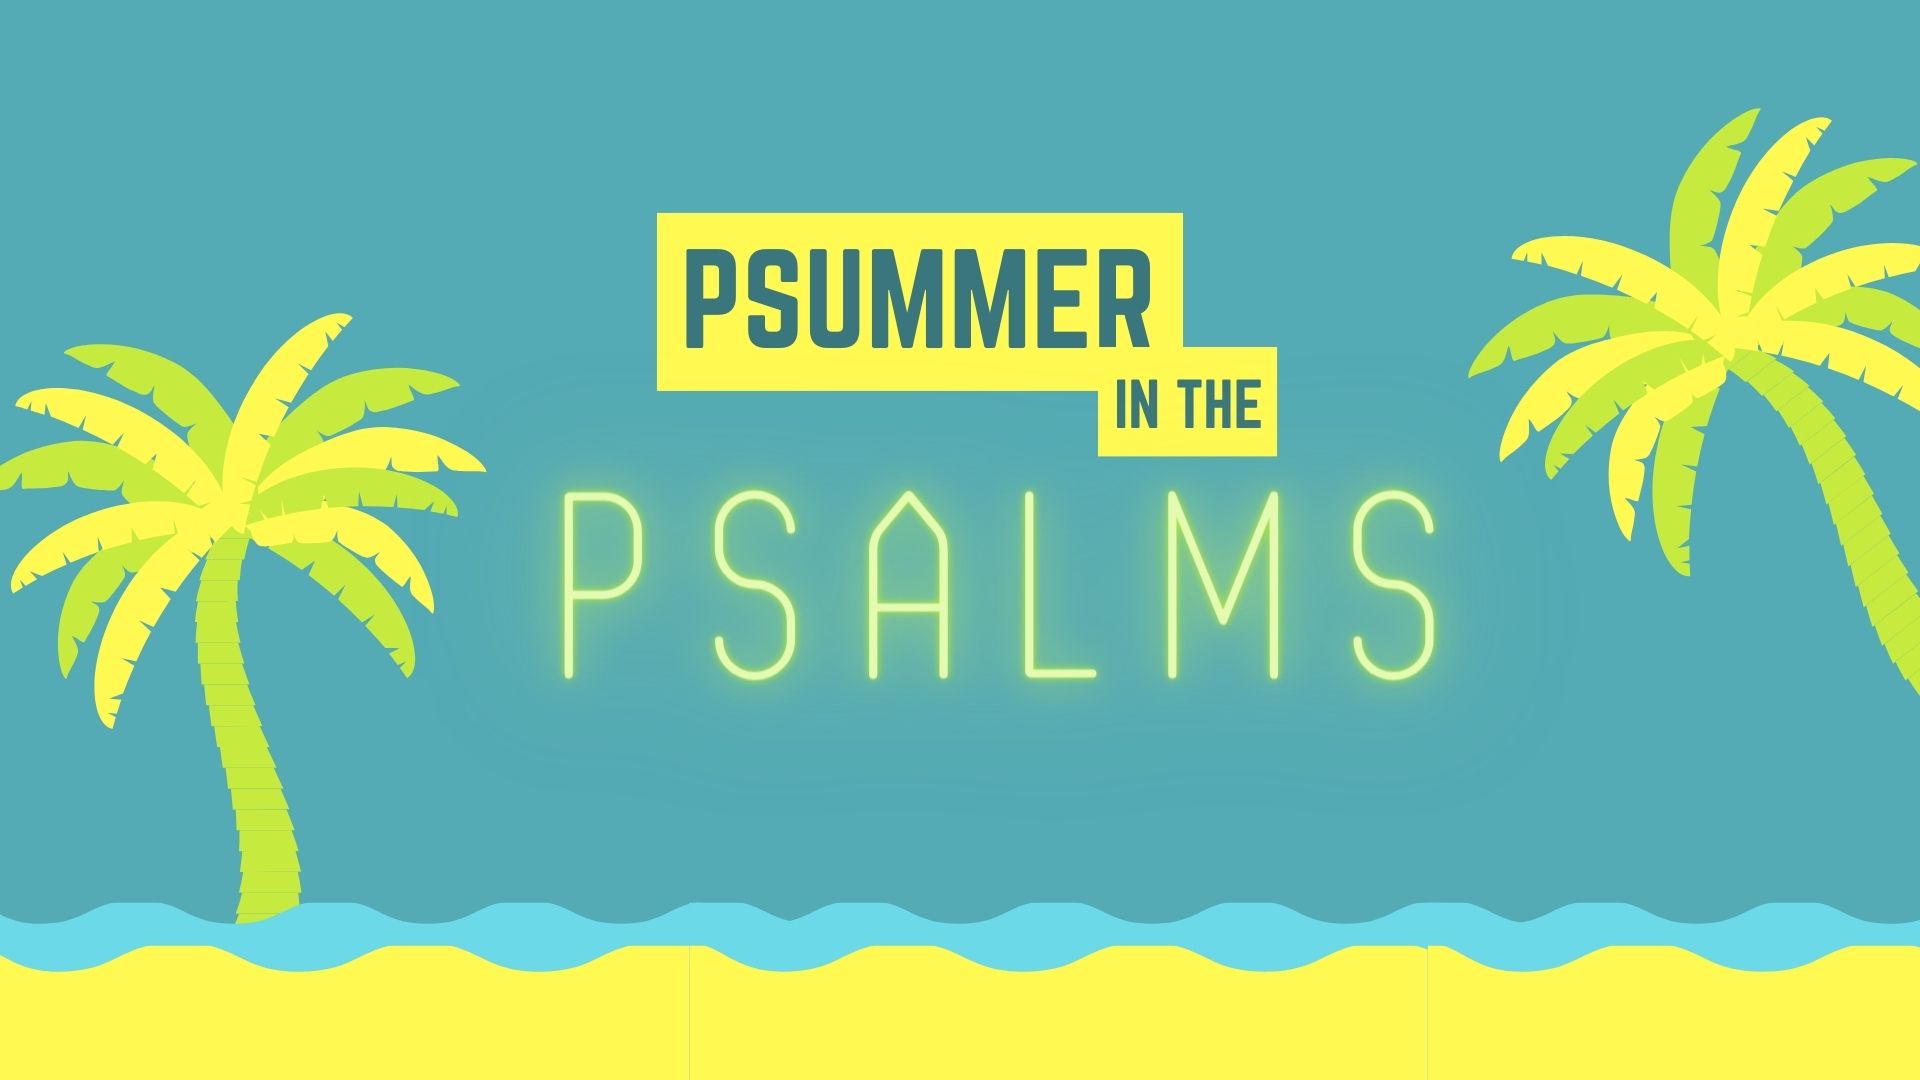 Psummer in the Psalms - Psalm 91